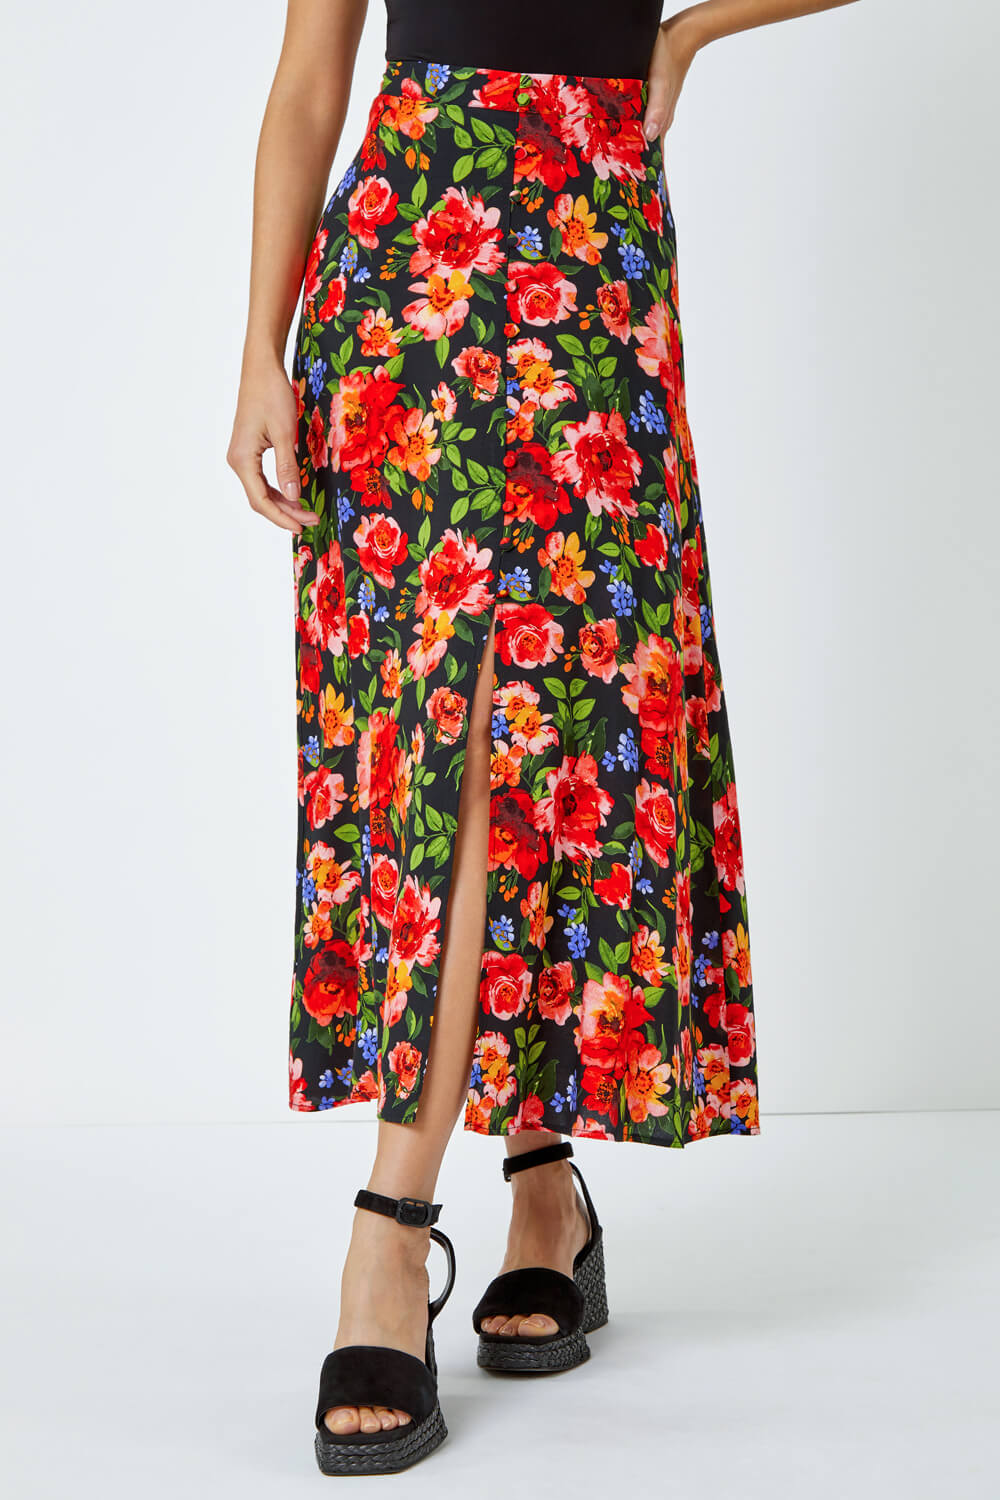 Red Floral Print Button Detail Maxi Skirt, Image 5 of 5